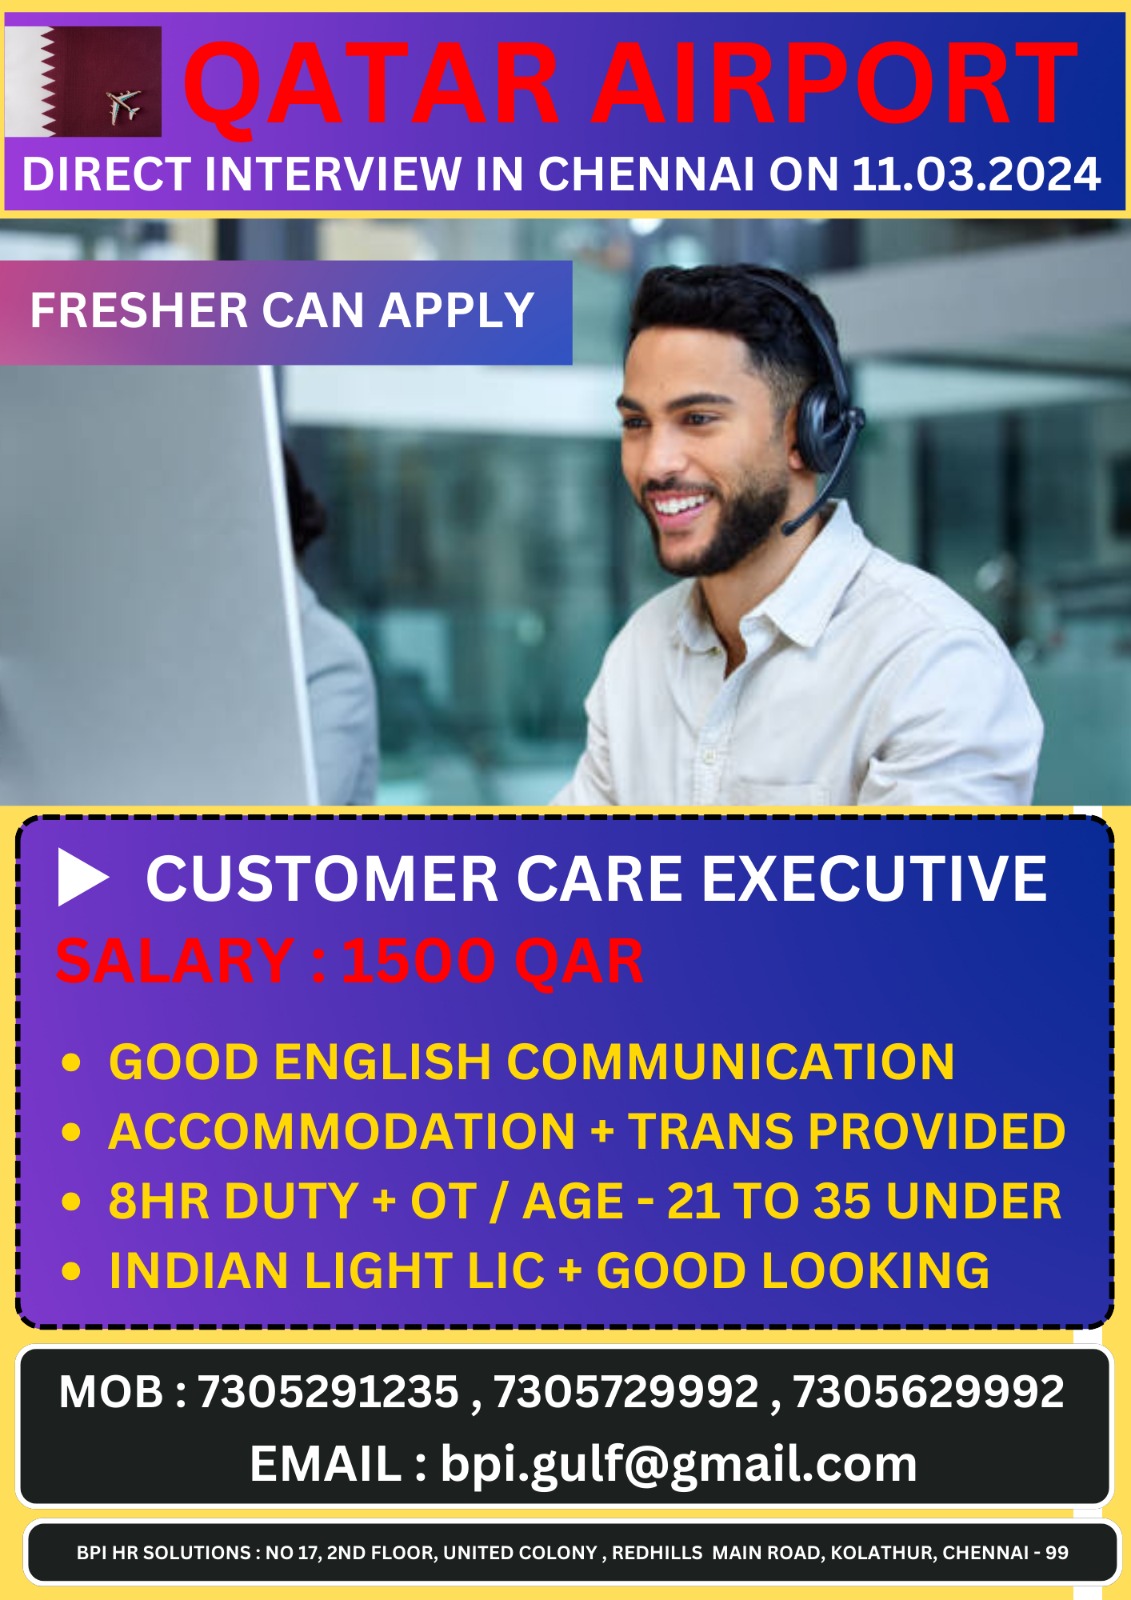 Qatar jobs vacancies for airport, Direct interview in Chennai on